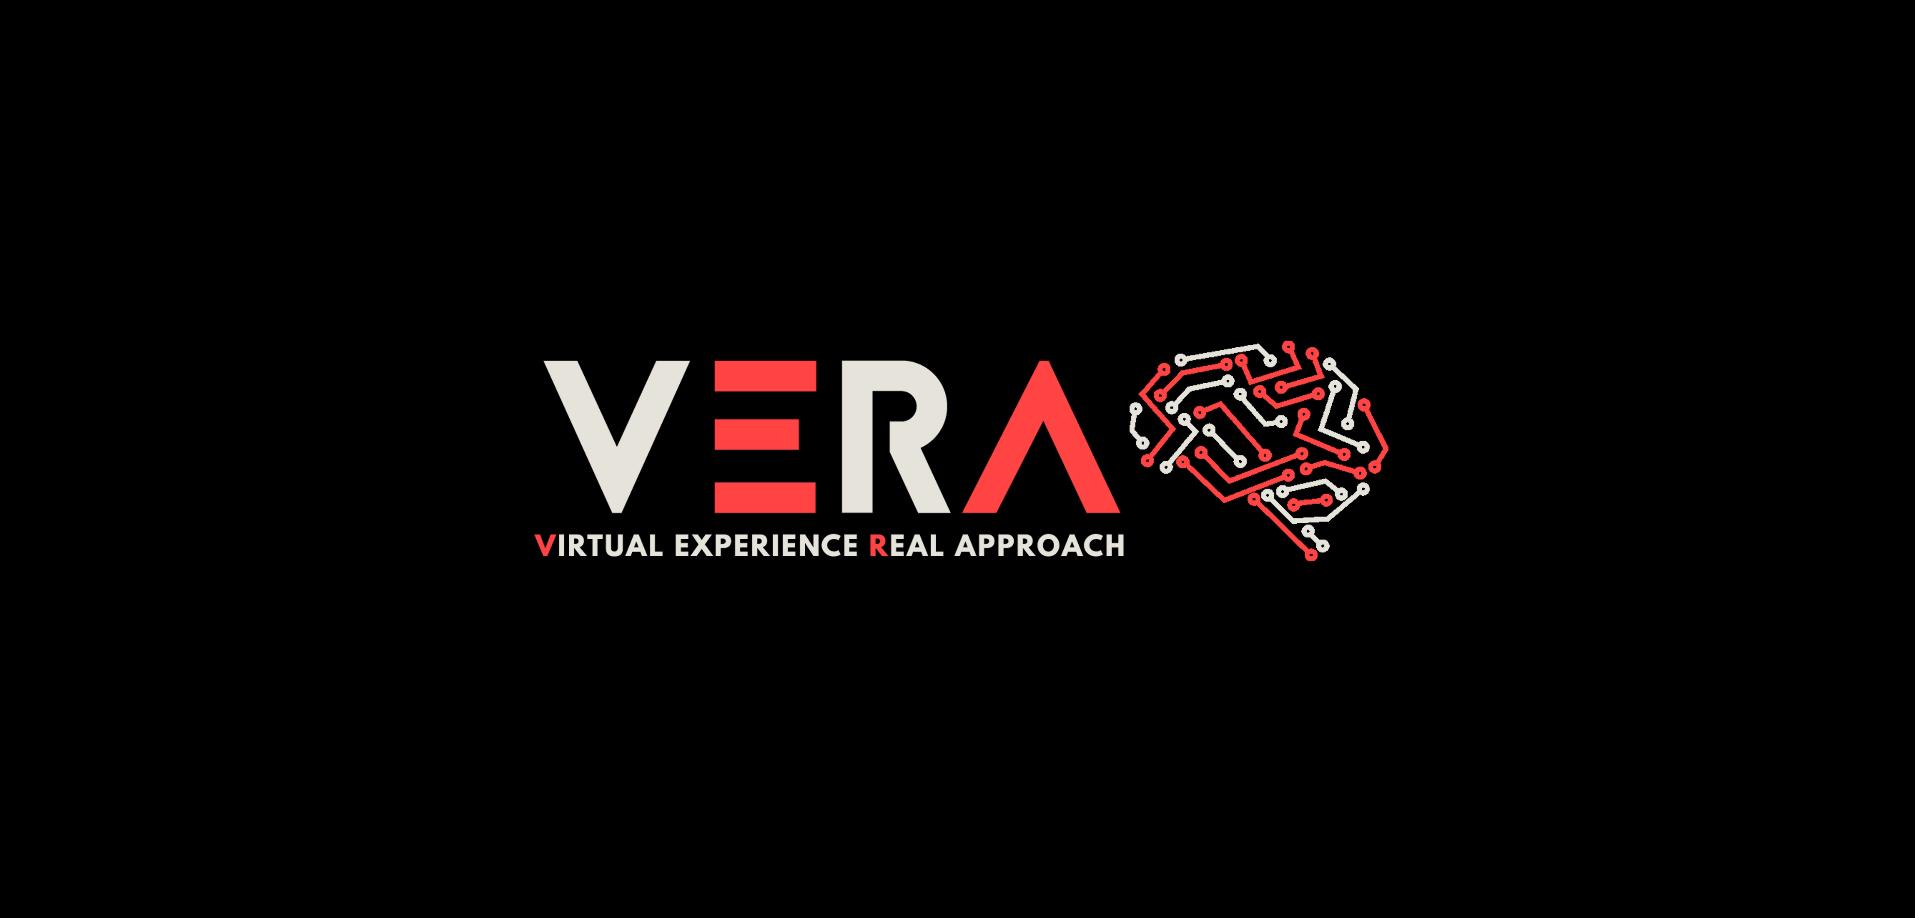 VERA Virtual Experience Real Approach 